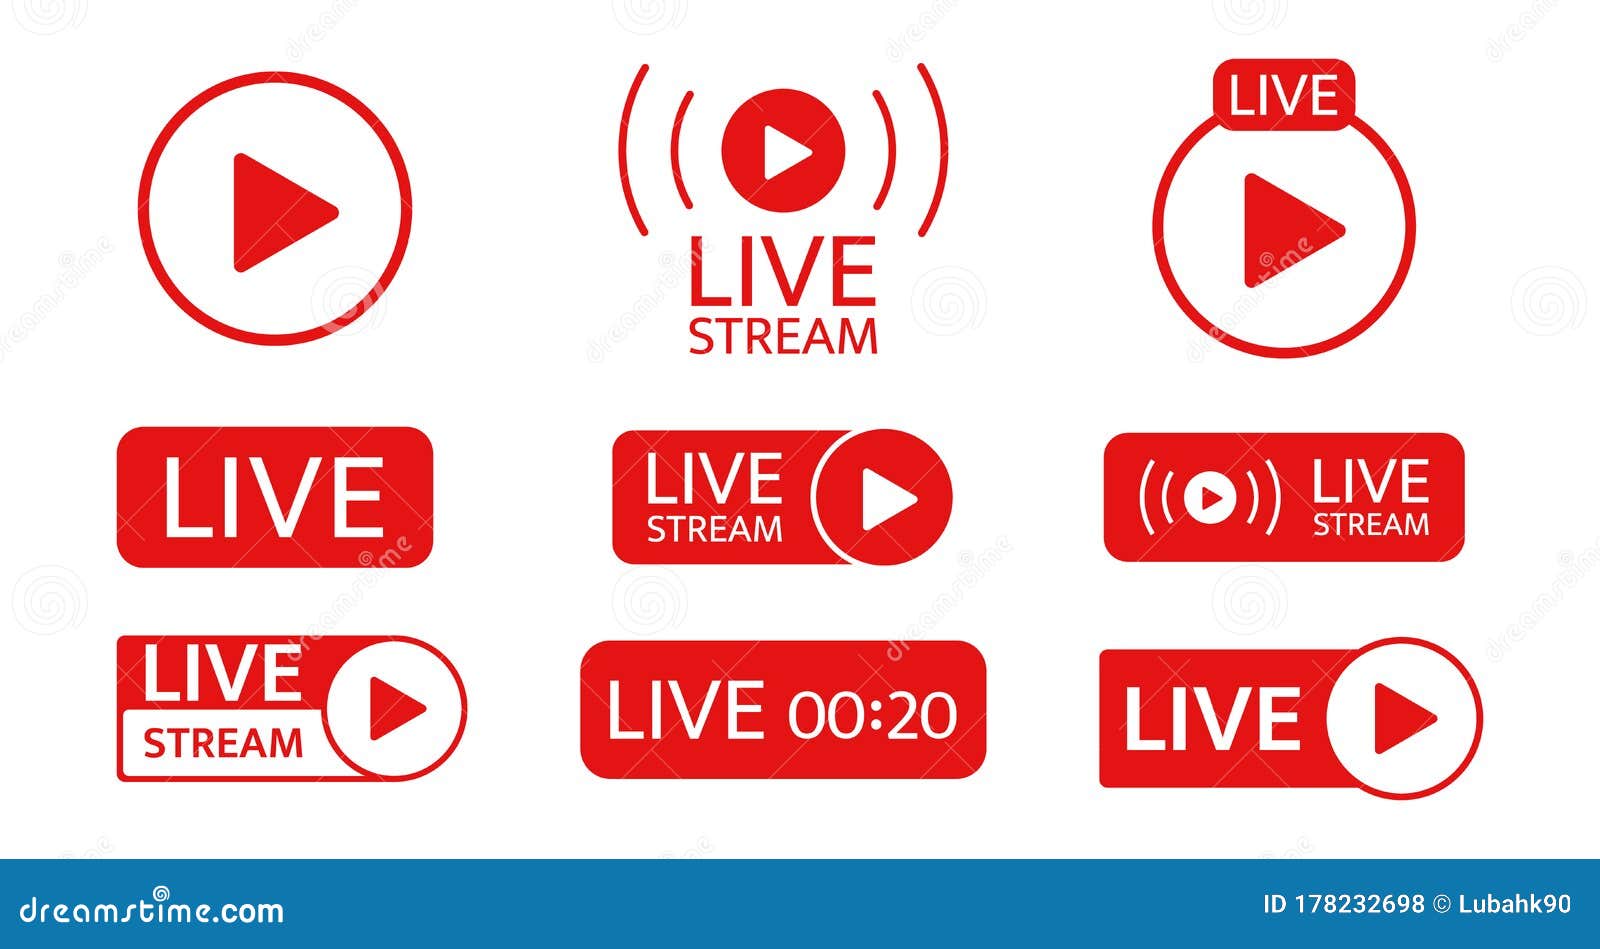 live stream icon set. social media template. live streaming, video, news  on transparent background. broadcasting